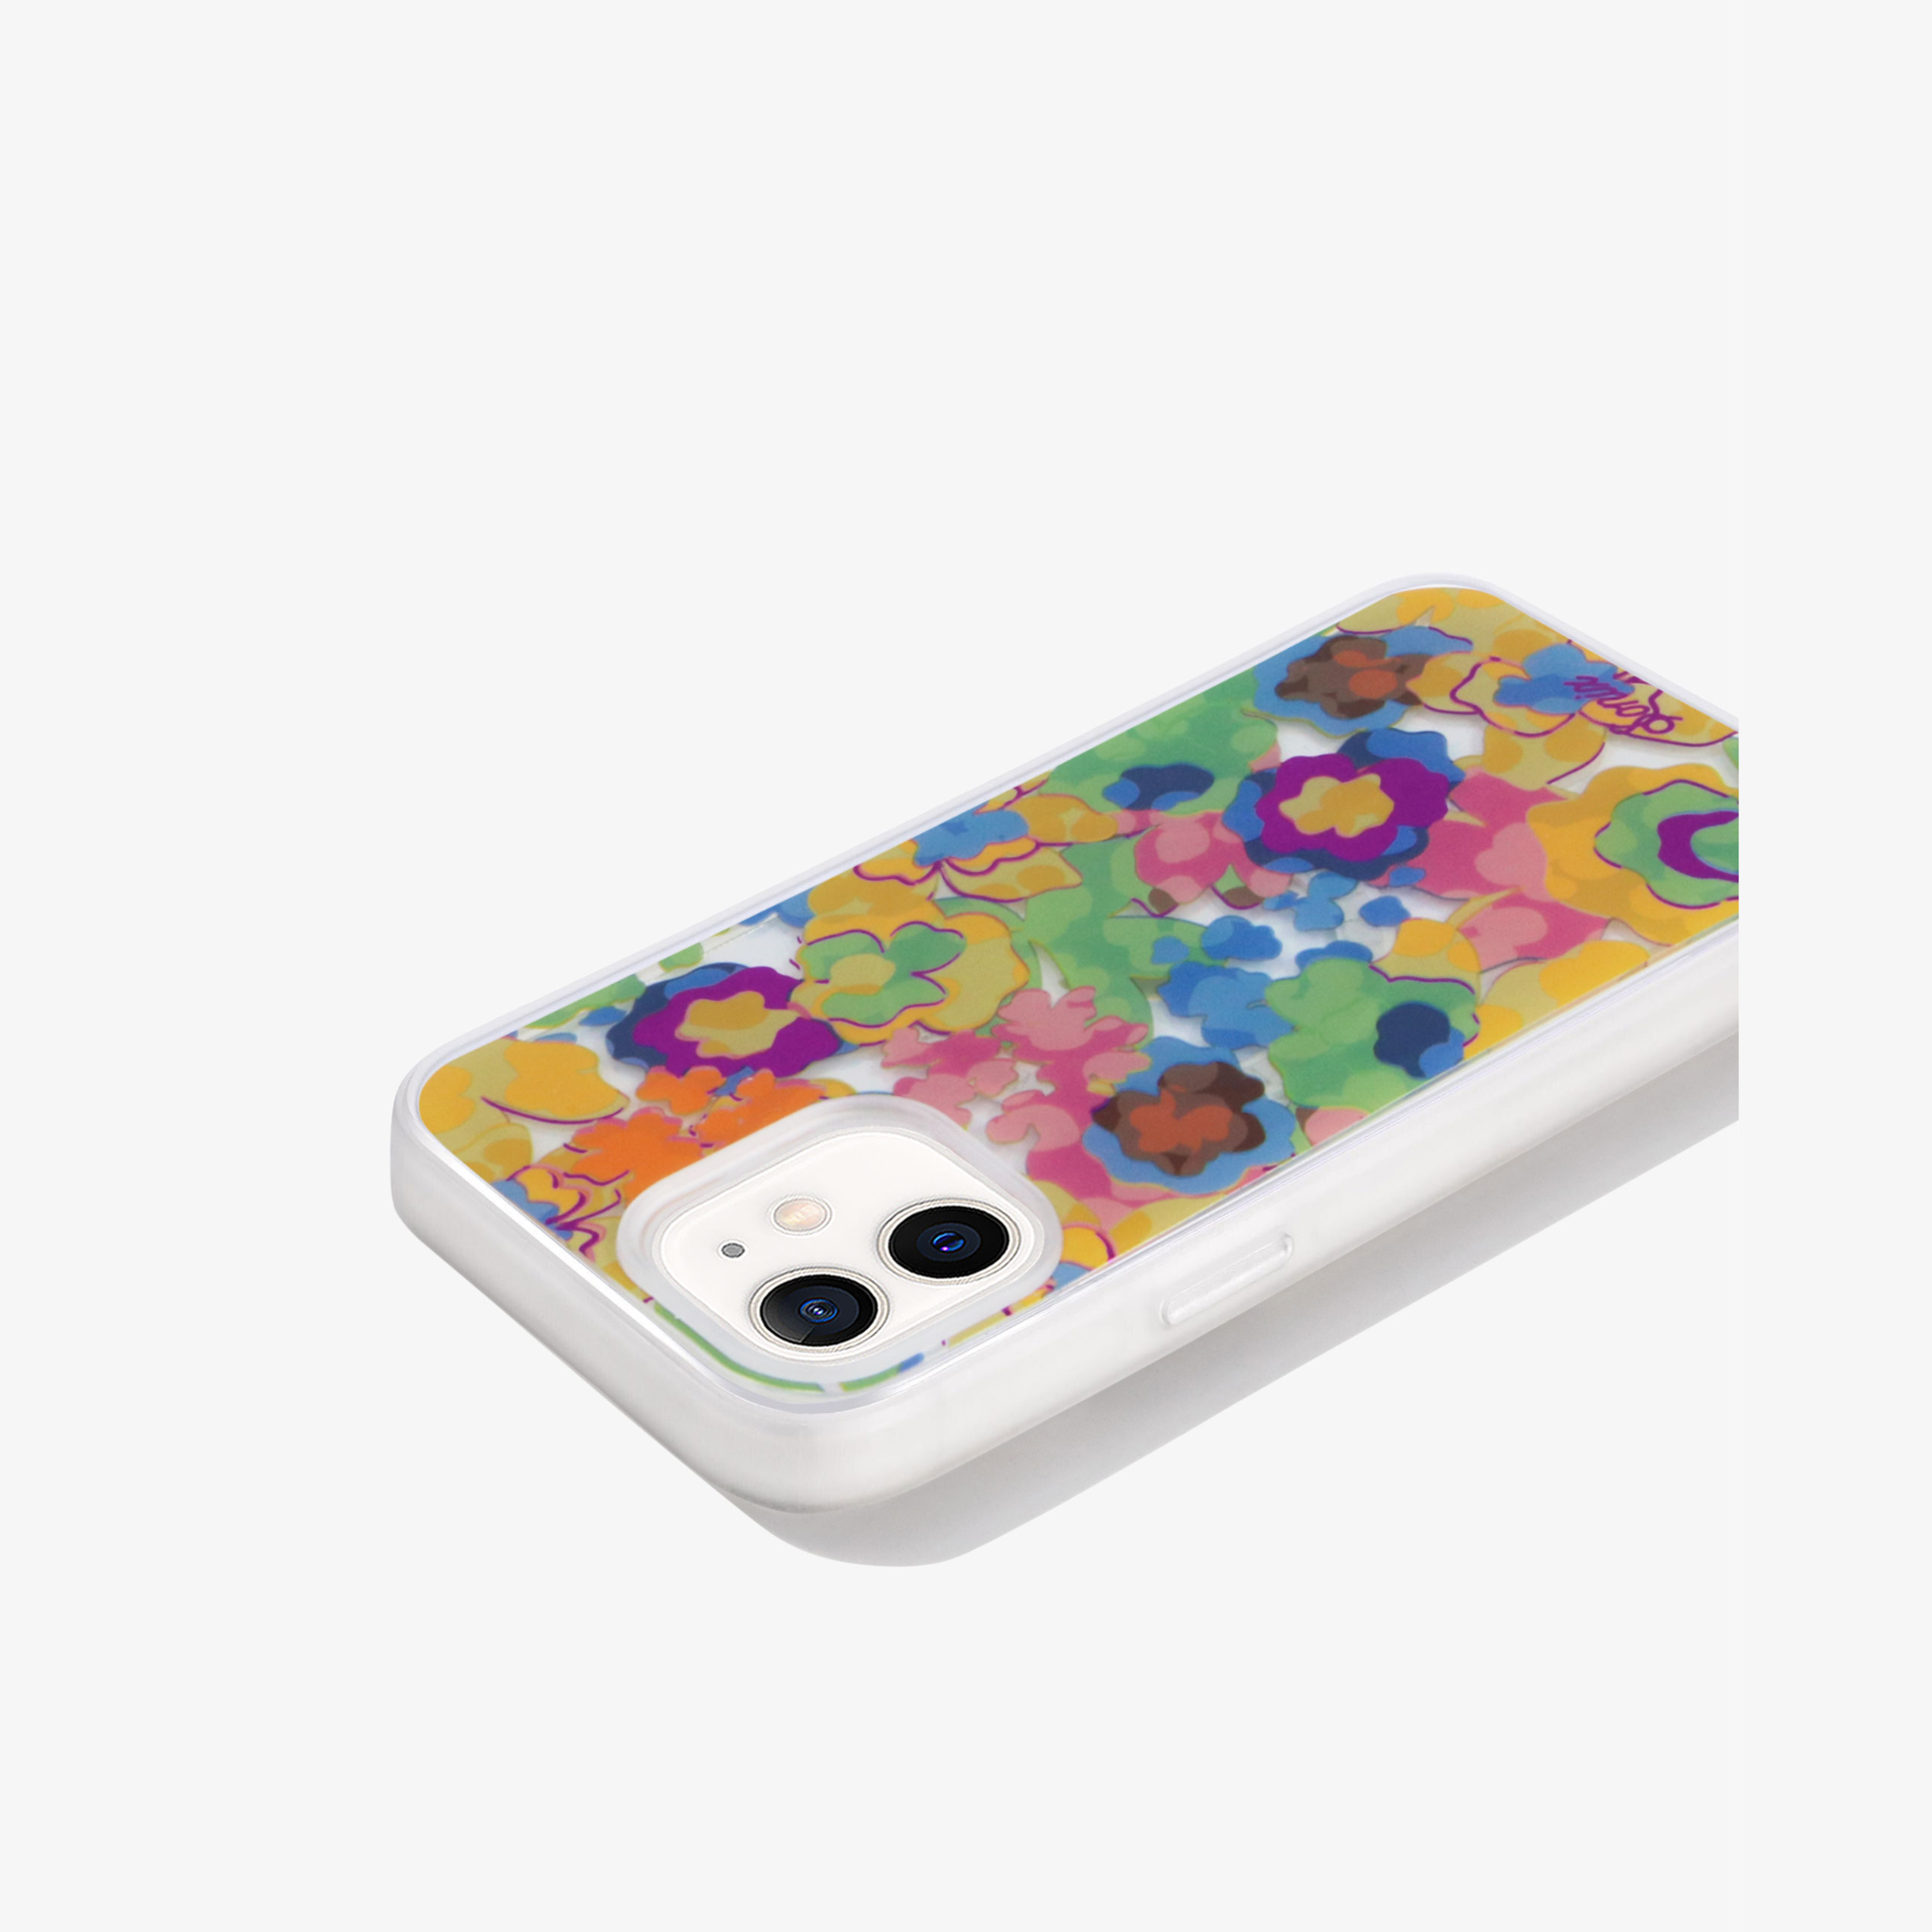  iPhone 12 with hues of blue, green, orange, and pink to create a floral piece of art